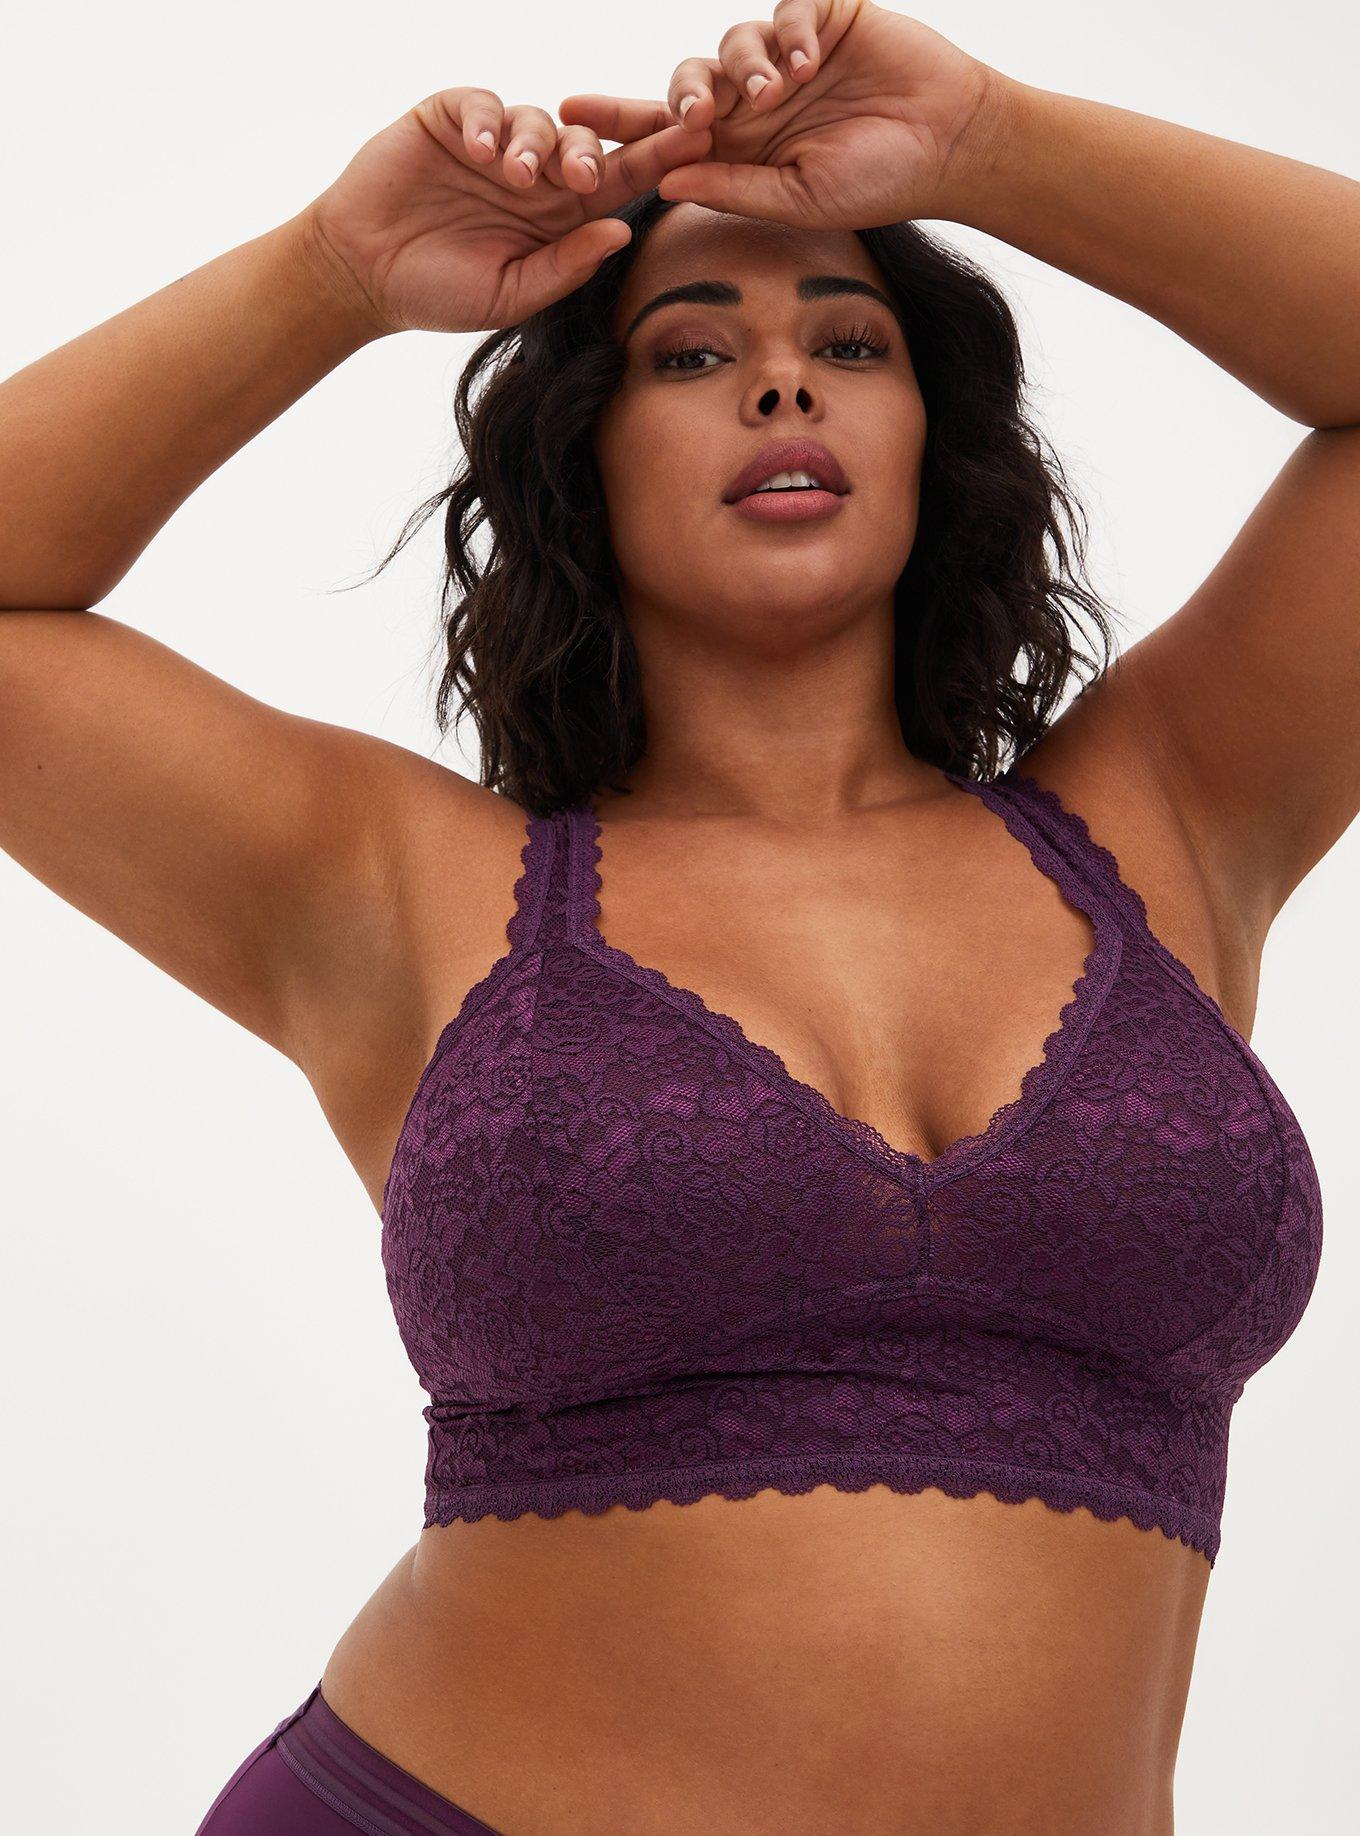 February 2022s Bralette – Layered With Lace